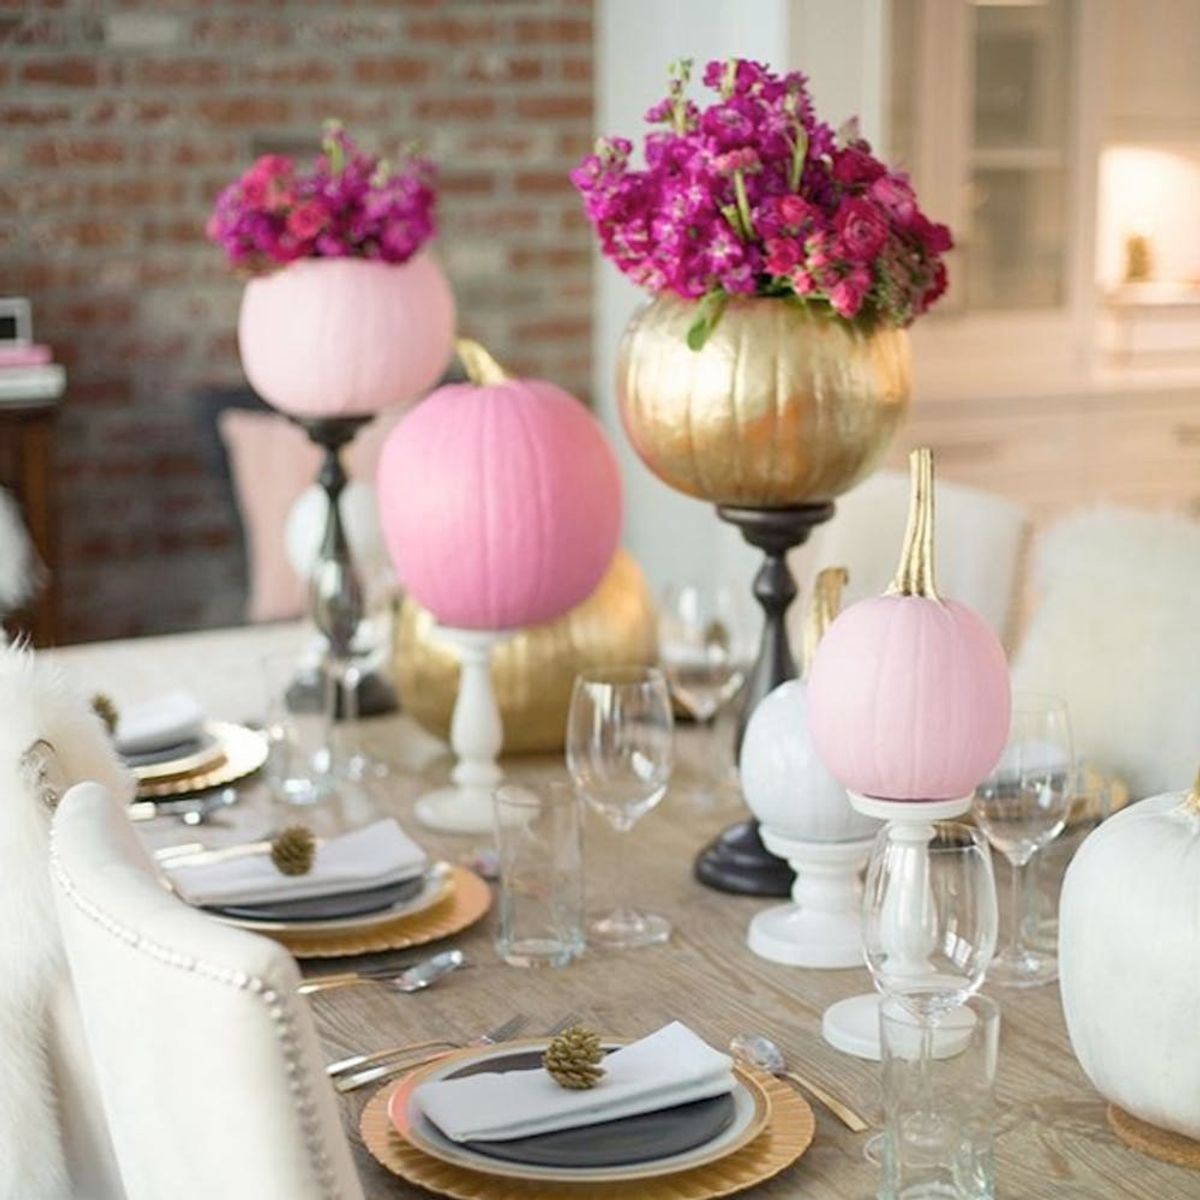 10 Halloween Tablescapes for a Fabulous + Frightening Feast